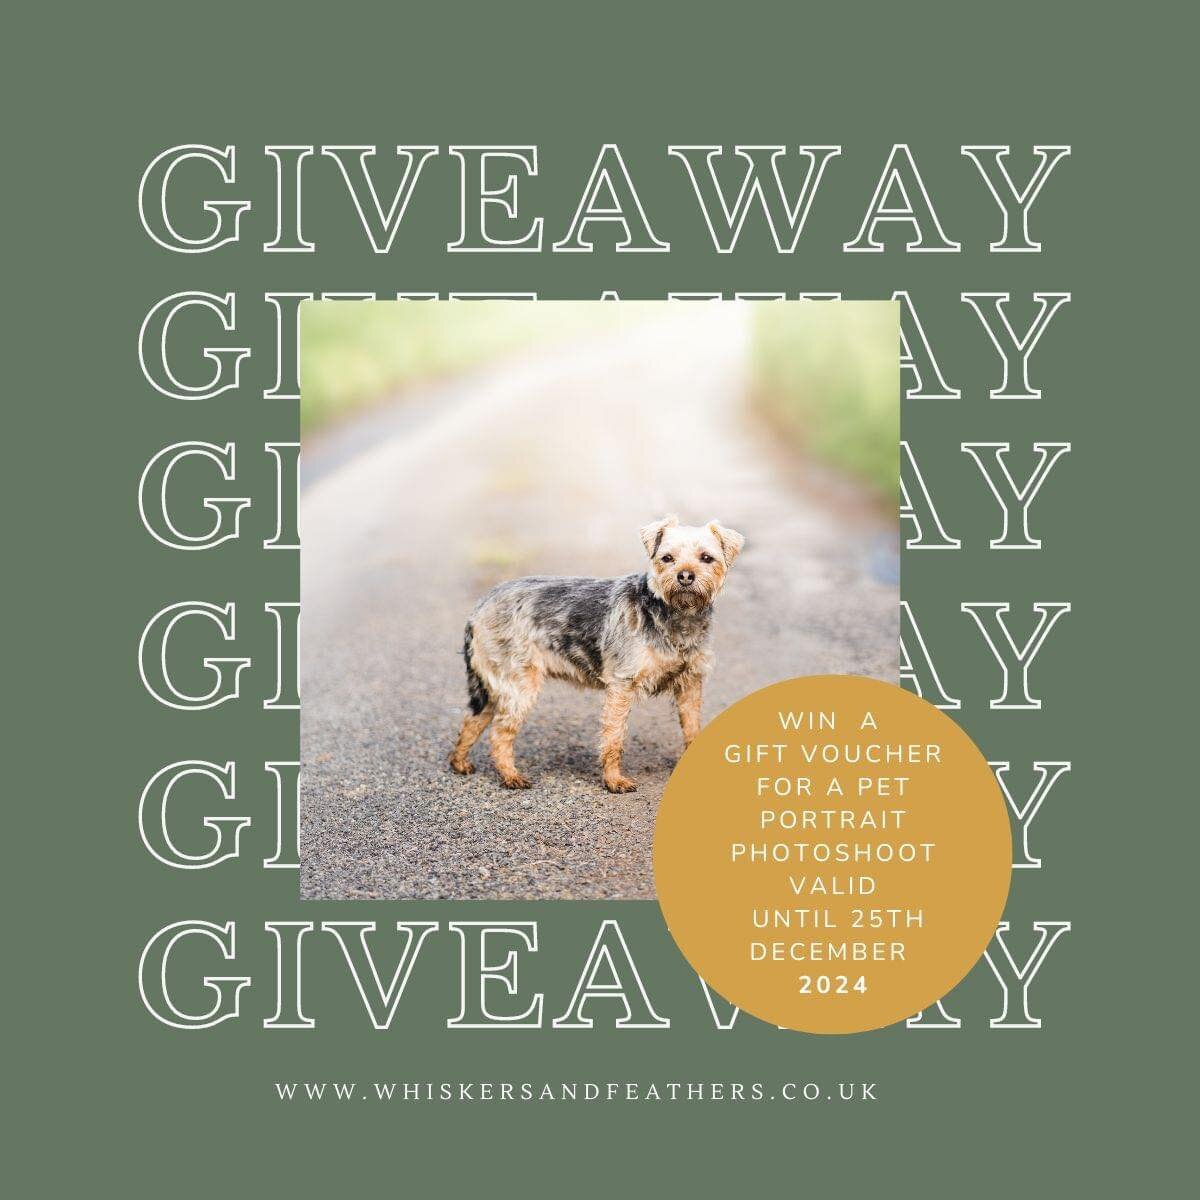 ✨ Pet Photoshoot Giveaway! Enter Now for a Chance to Win! ✨

🏆 Enter Now:
Simply fill in a quick form at www.whiskersandfeathers.co.uk/competition 

Winners to be announced this Sunday!

. . . . . . . . . . . . .

This Christmas, I am overjoyed to s